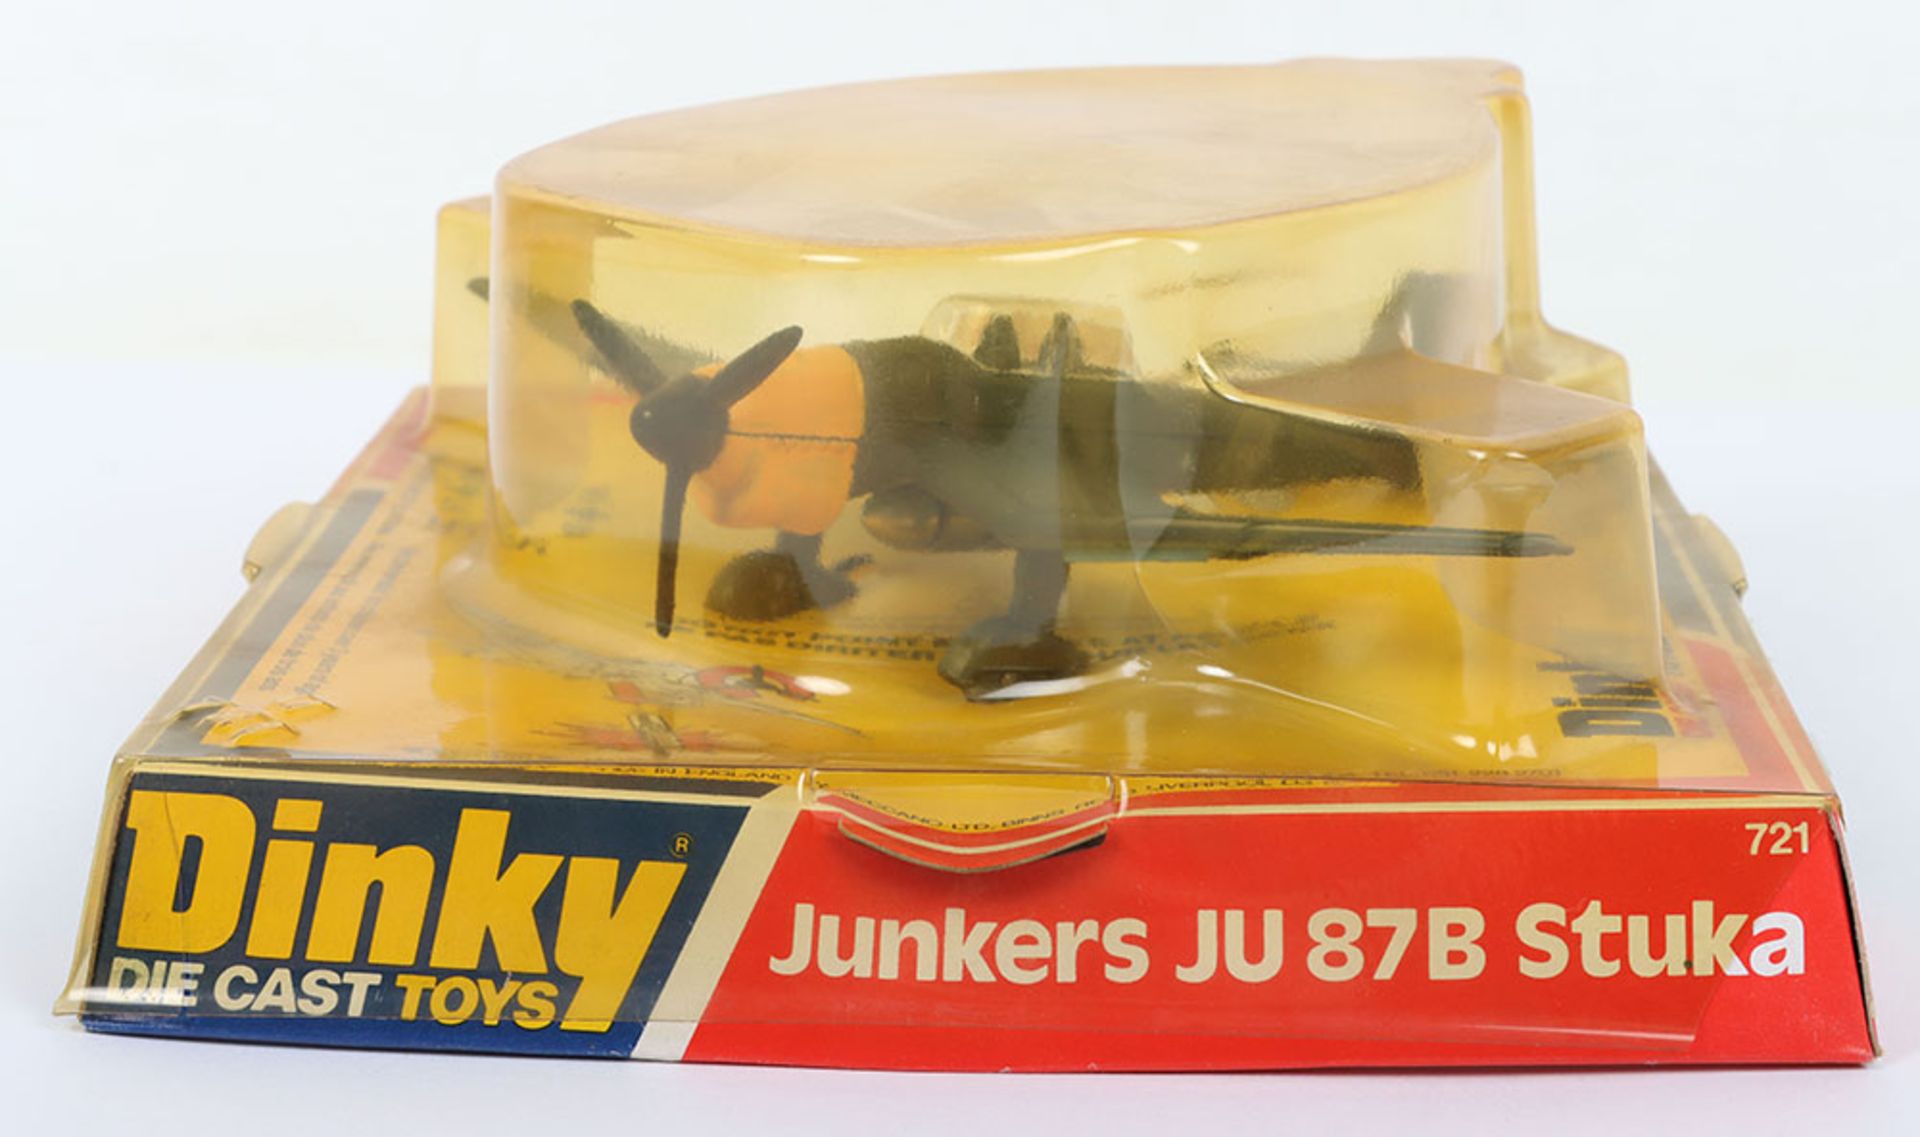 Dinky Toys 721 German Junkers Ju 87B Stuka Aircraft with dropping cap firing bomb! - Image 2 of 5